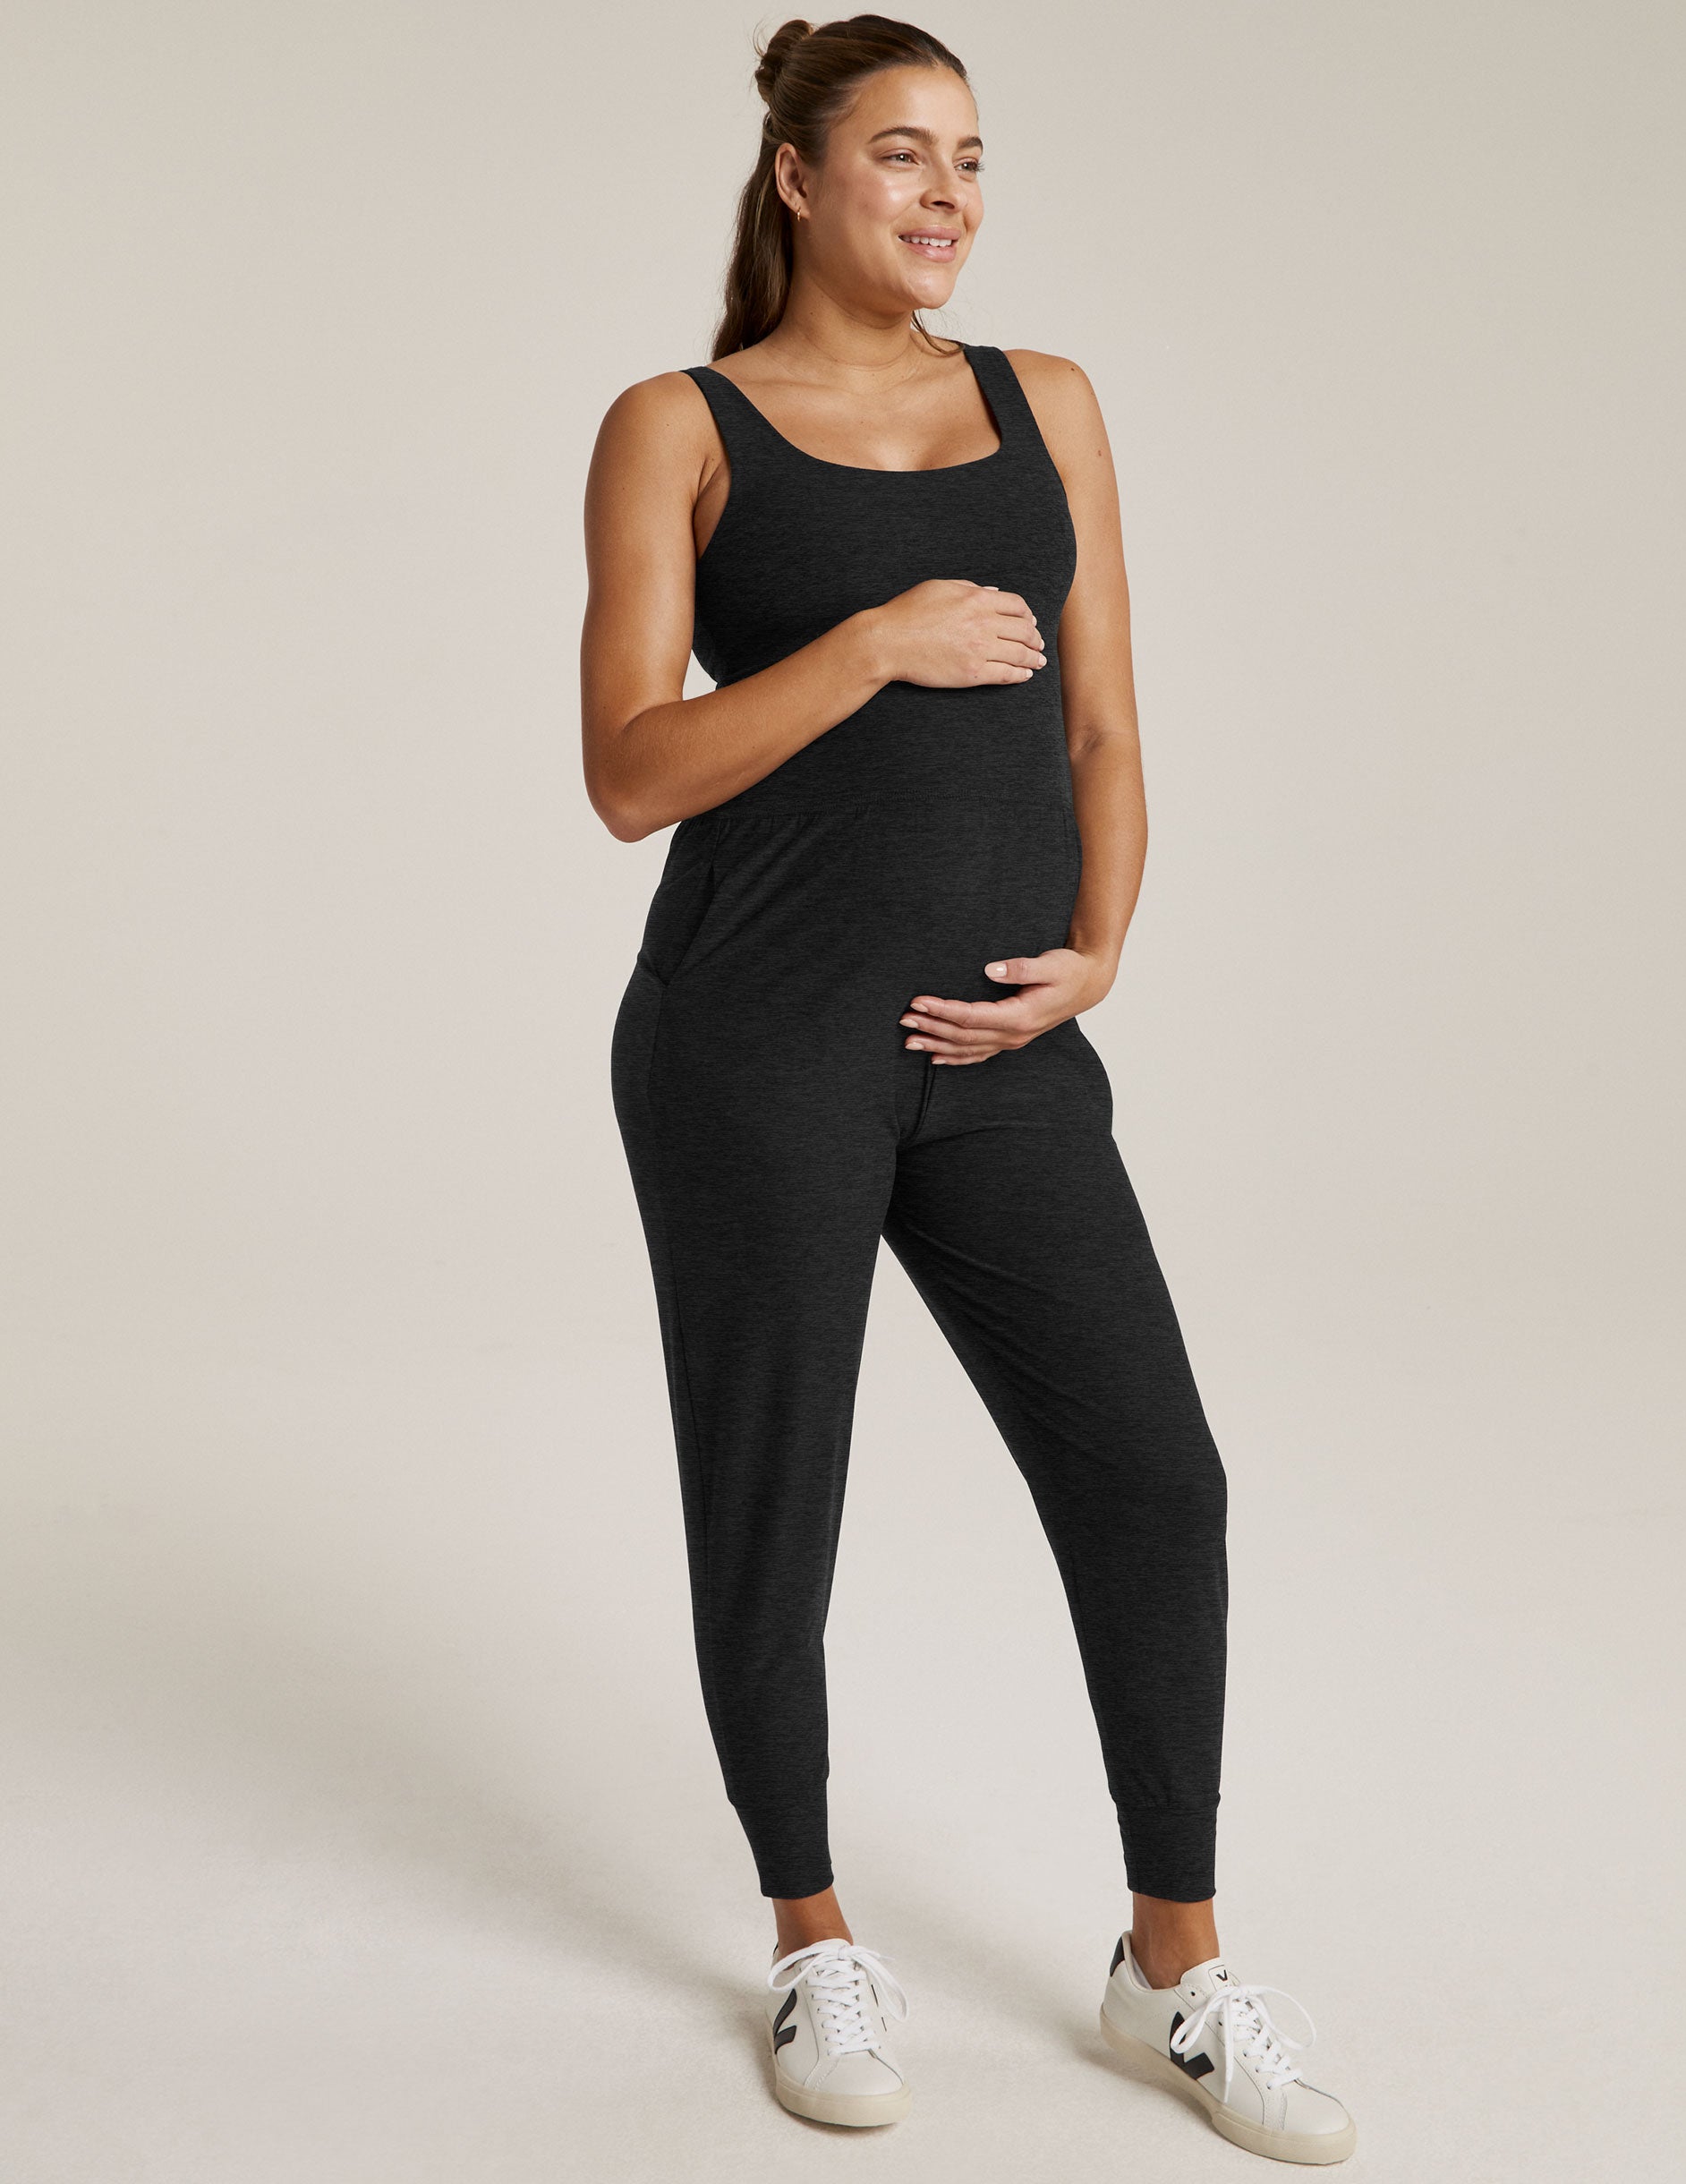 Buy Wholesale China Maternity Leggings Over The Belly, Extra Pants